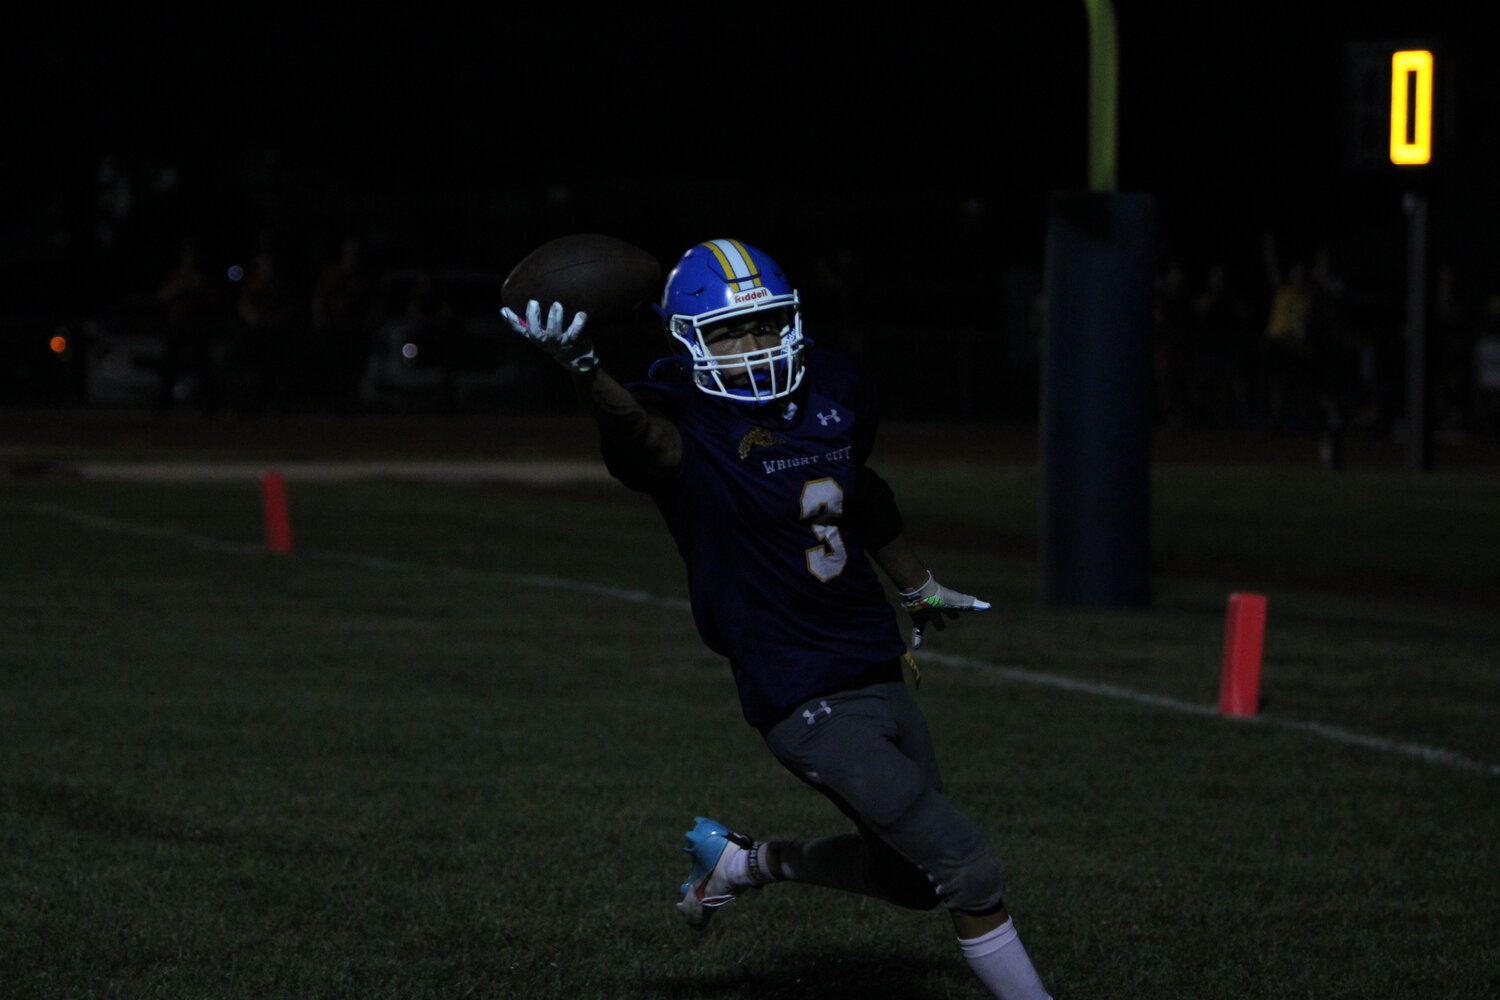 Denzel Dowdy scores after a 32-yard receiving touchdown. It was his only reception of the game.